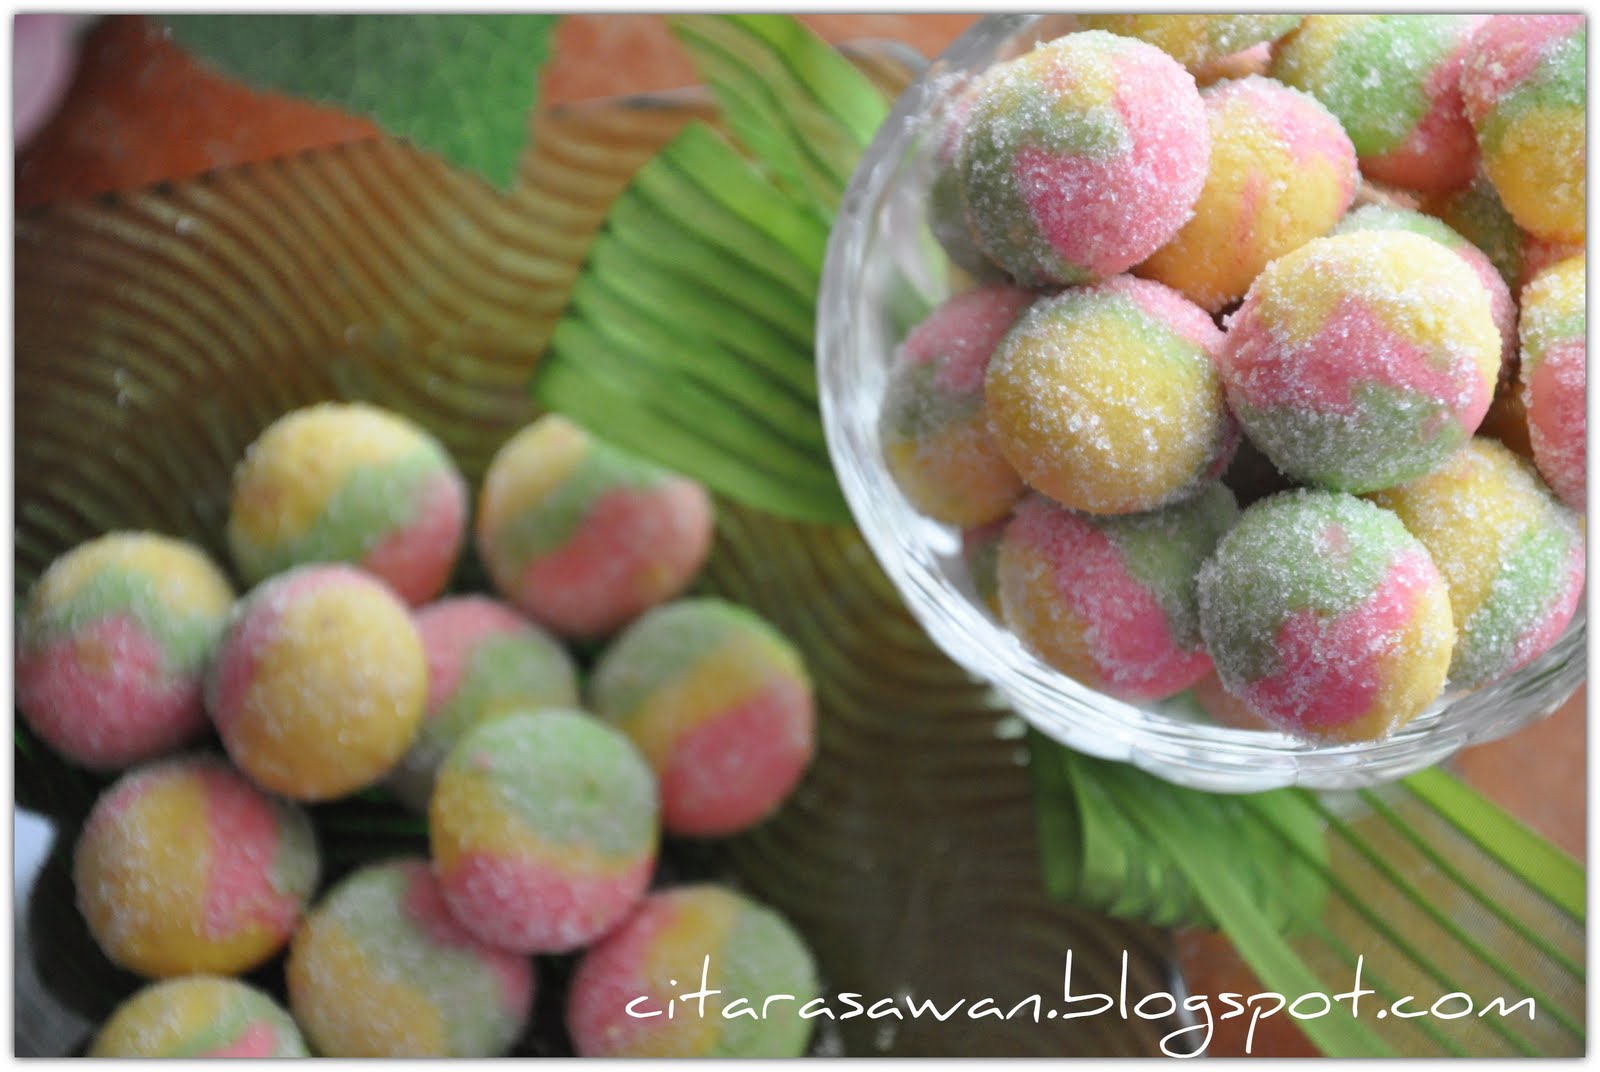 Biskut Suji Crystal / Crystal Ball Cookies - Recipes Today!